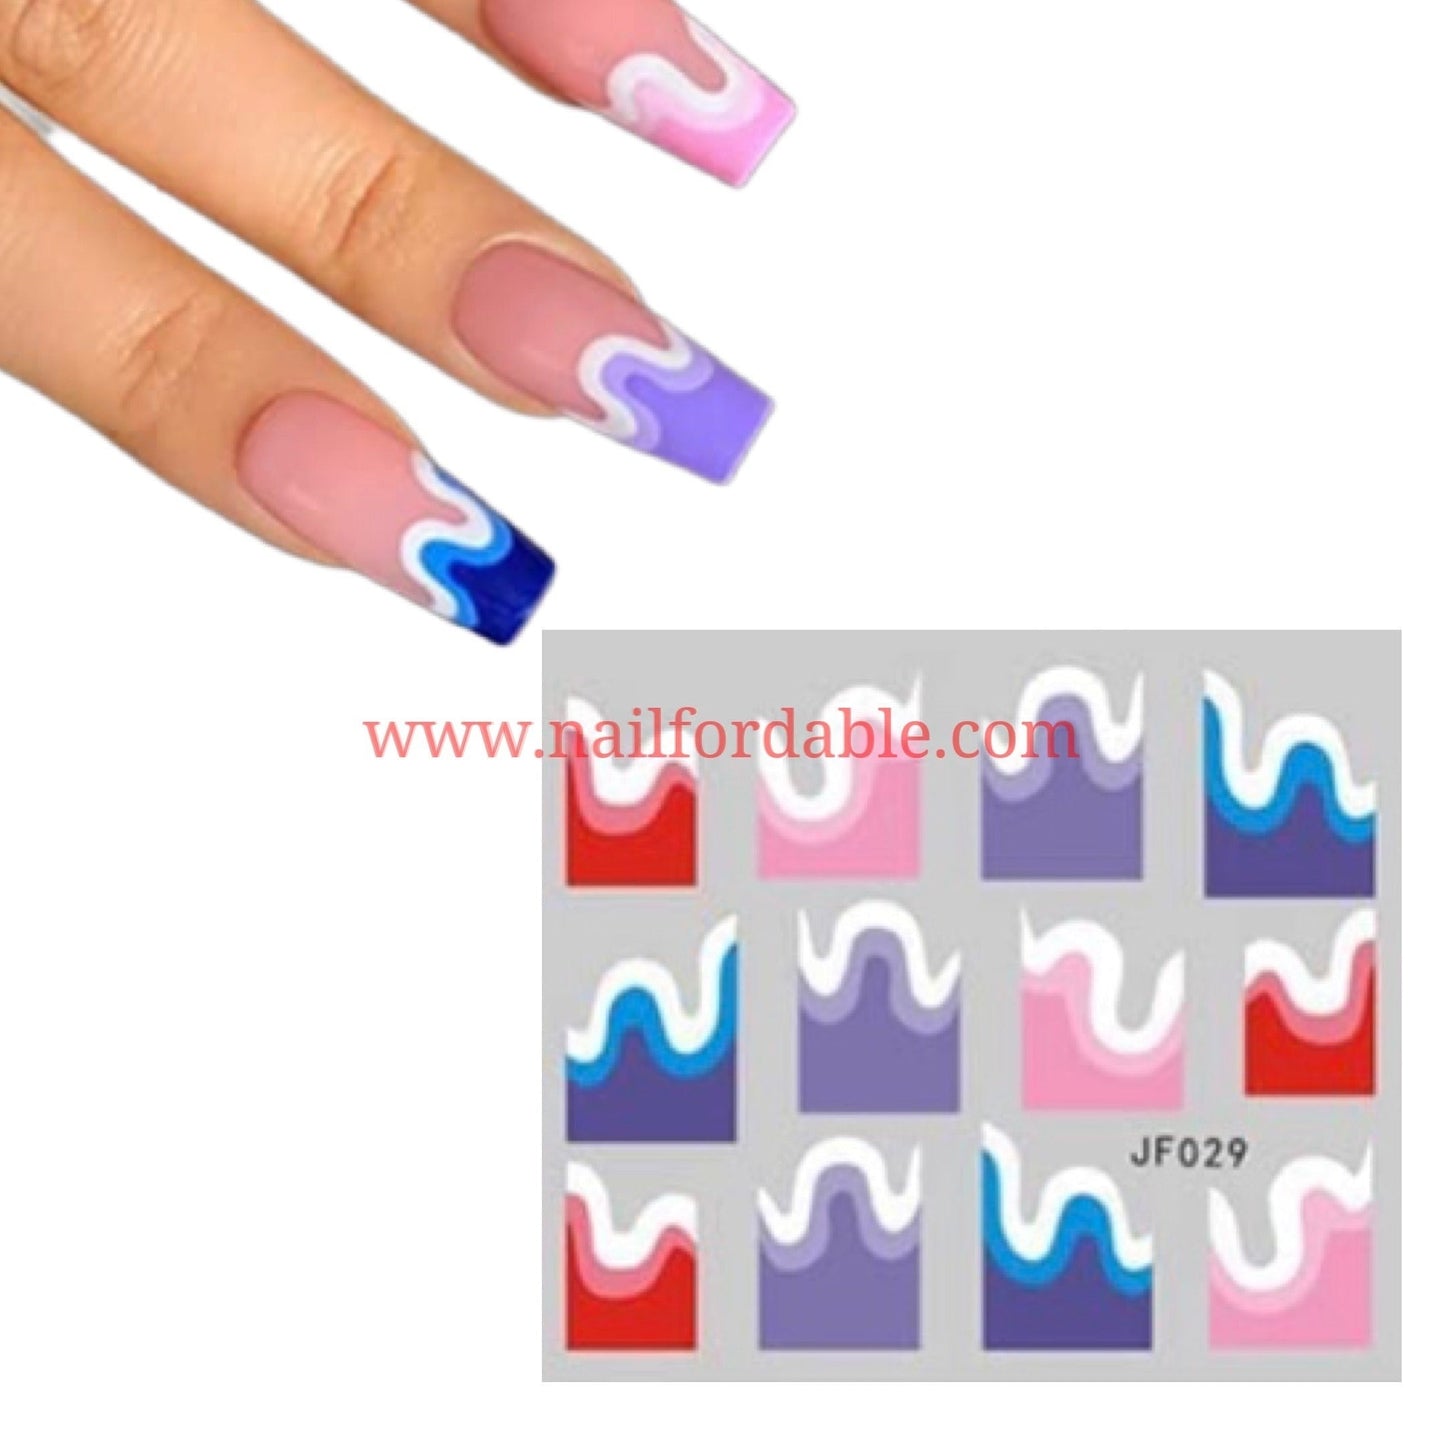 Curves water decal Nail Wraps | Semi Cured Gel Wraps | Gel Nail Wraps |Nail Polish | Nail Stickers